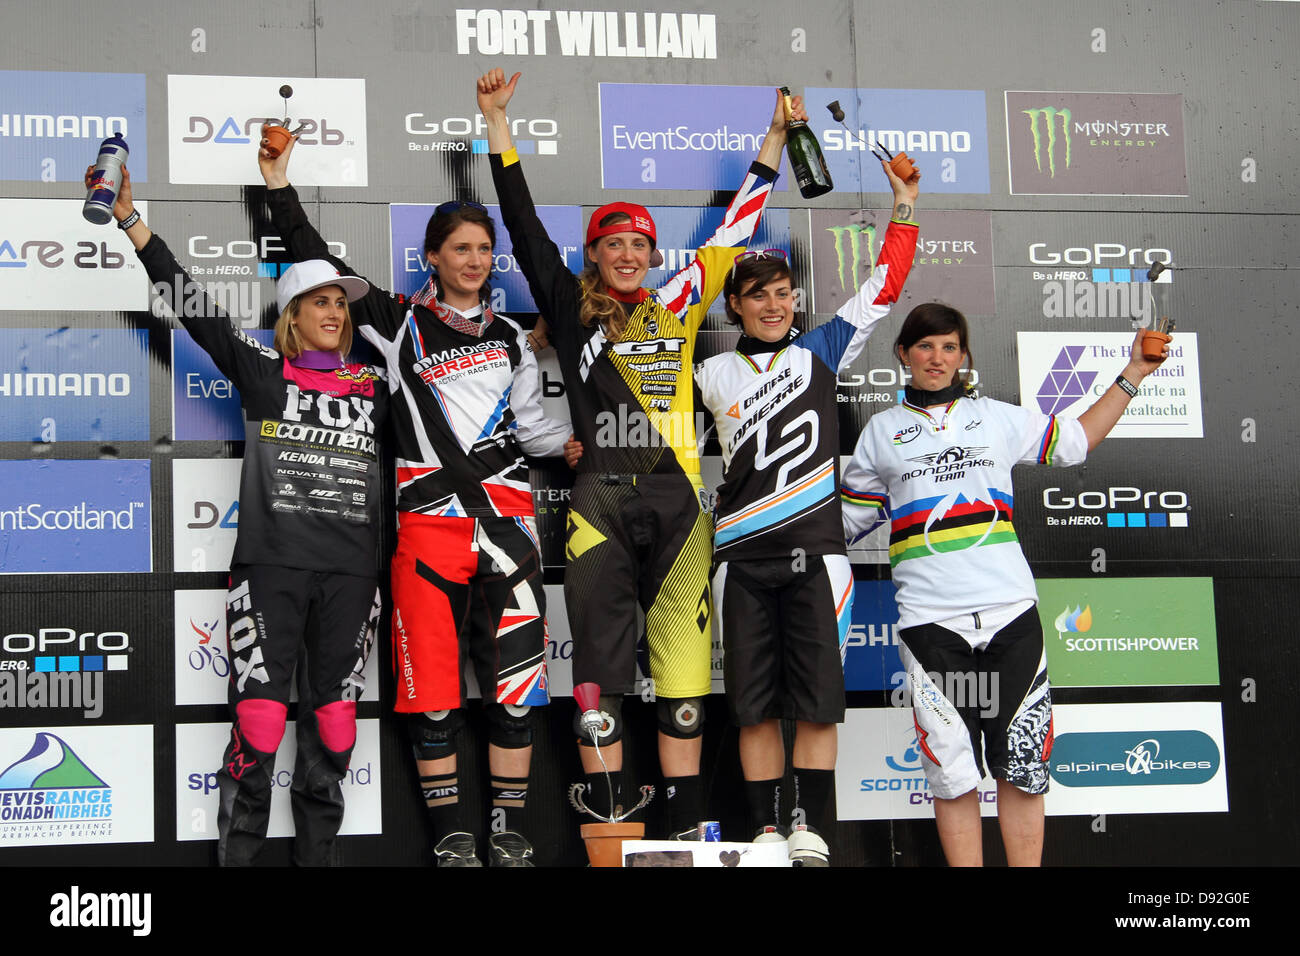 The women's podium, with winner Rachel Atherton (centre) acknowledging the crowd at the 1st round of the Downhill Mountain Bike World Cup, at Fort William 2013. Stock Photo